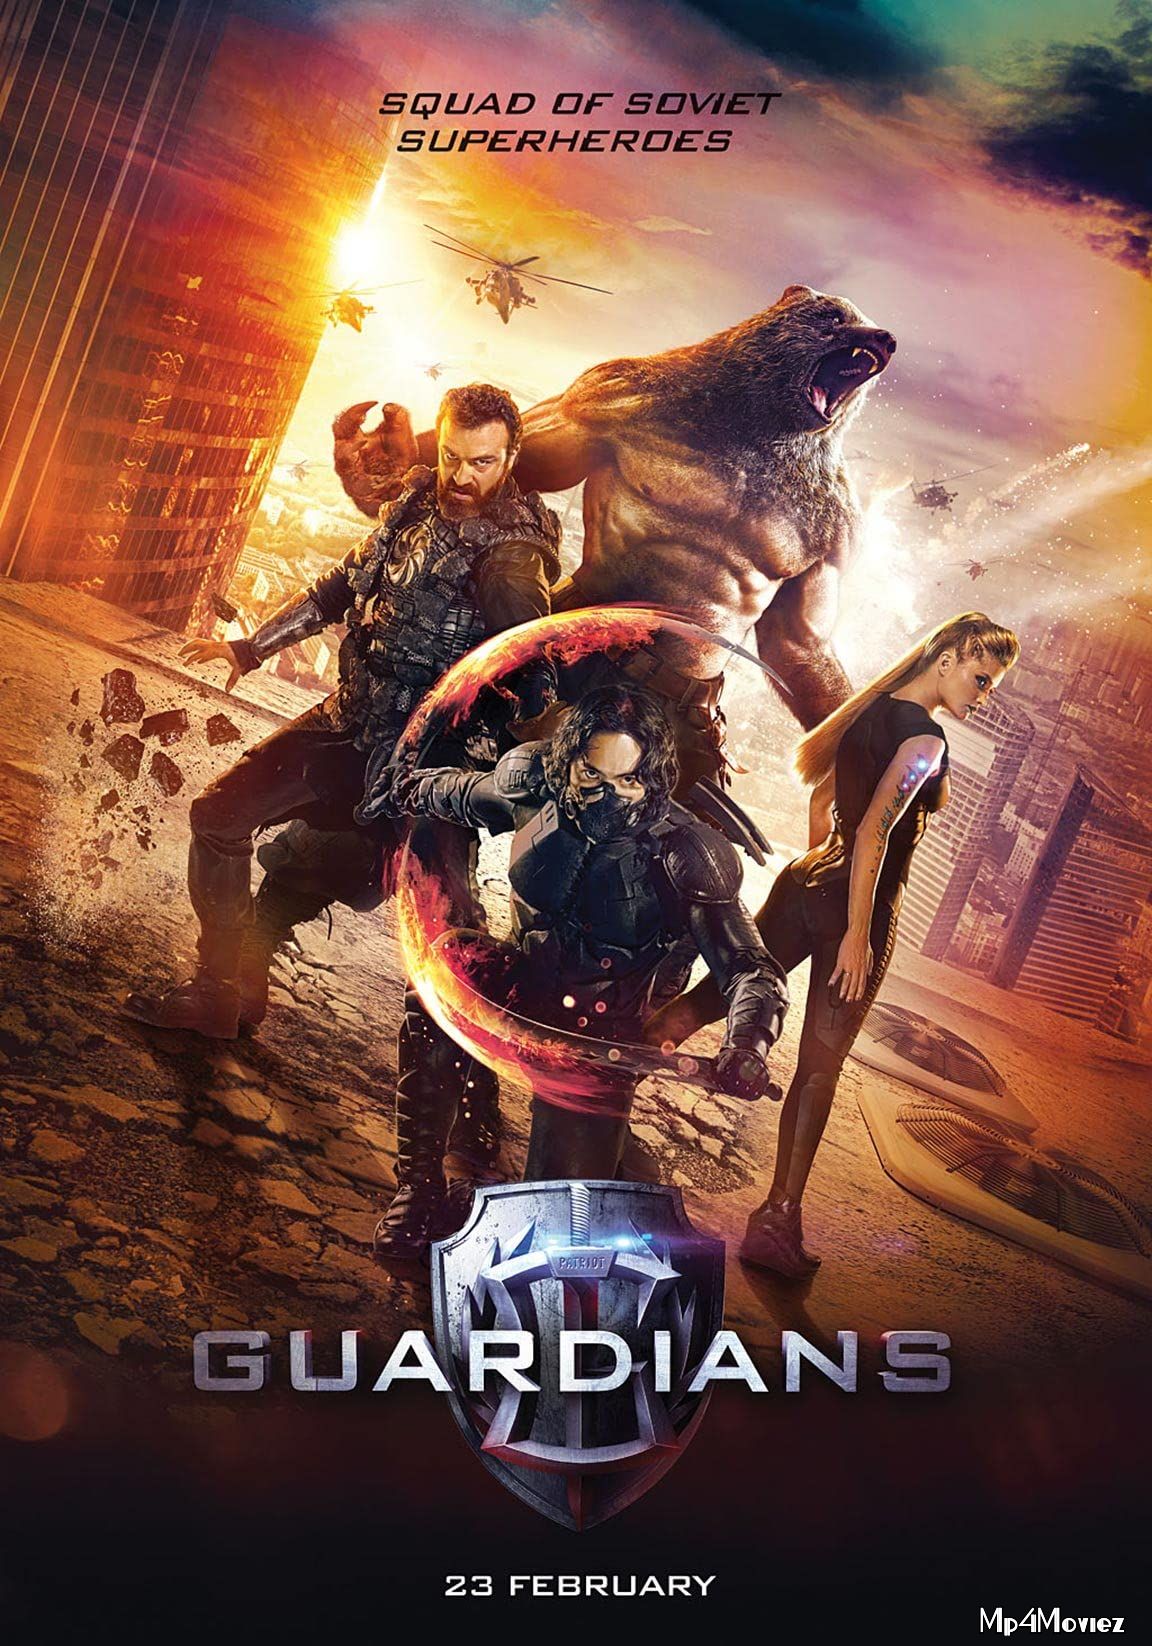 Guardians (2017) Hindi Dubbed BluRay download full movie